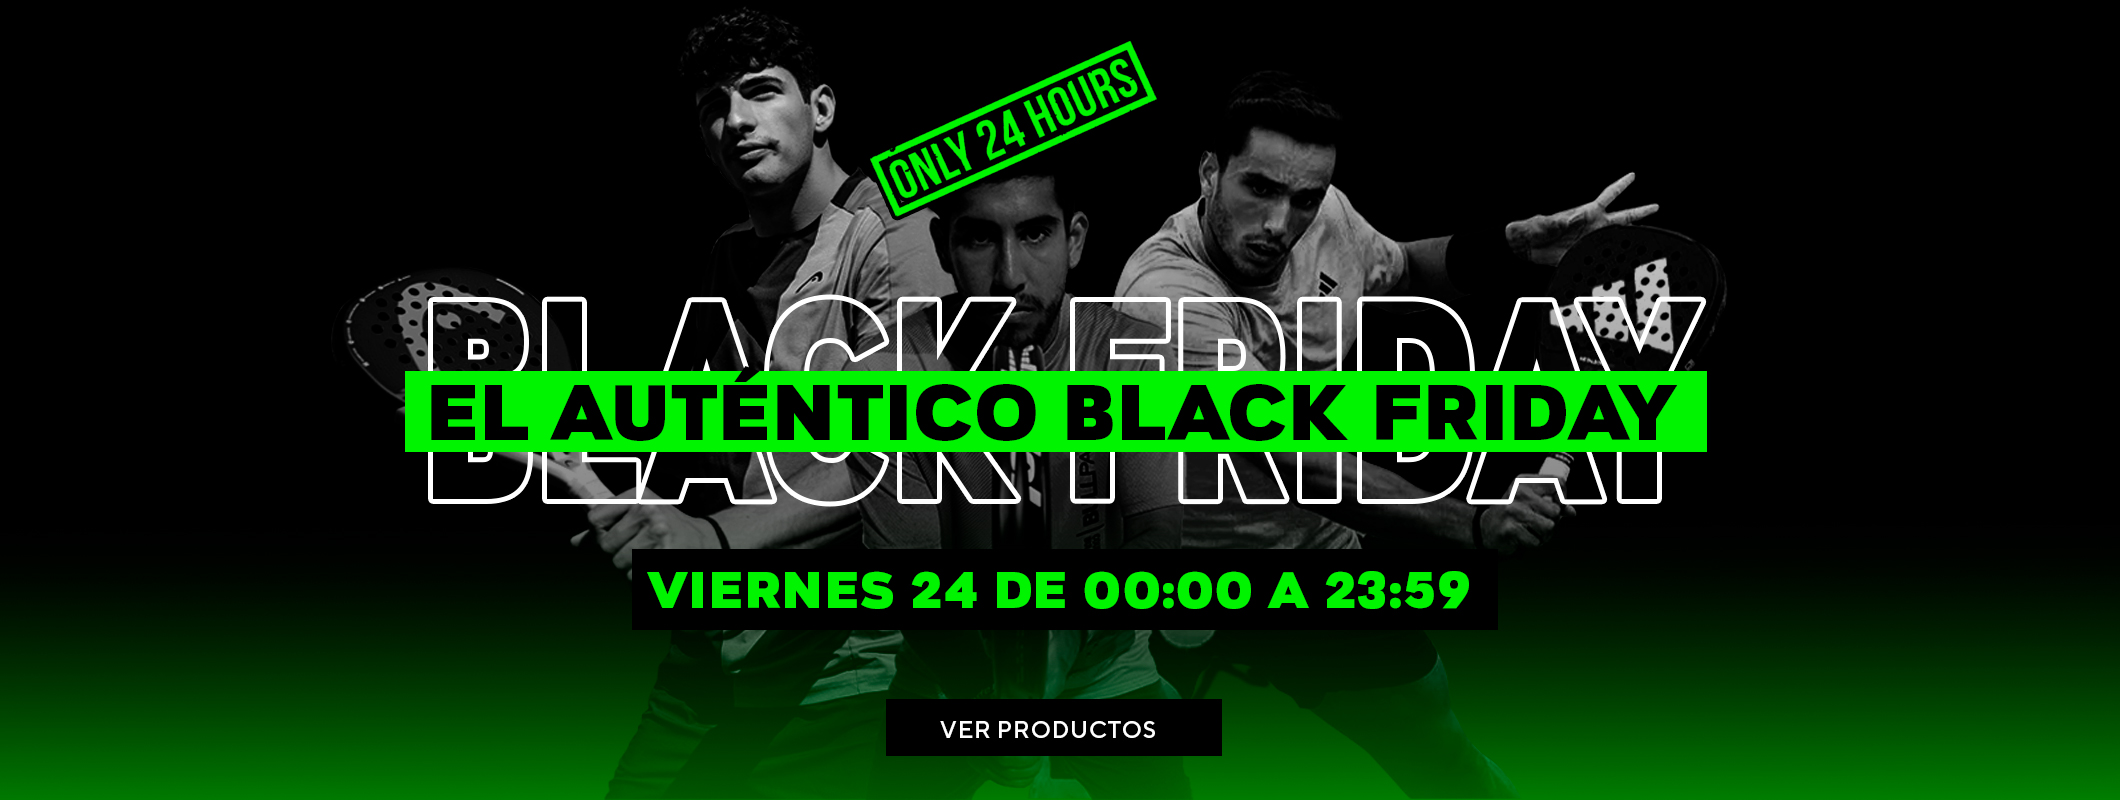 Pay attention at 00:00! Keepadel rounds off Black Friday with 24 hours of unbeatable prices